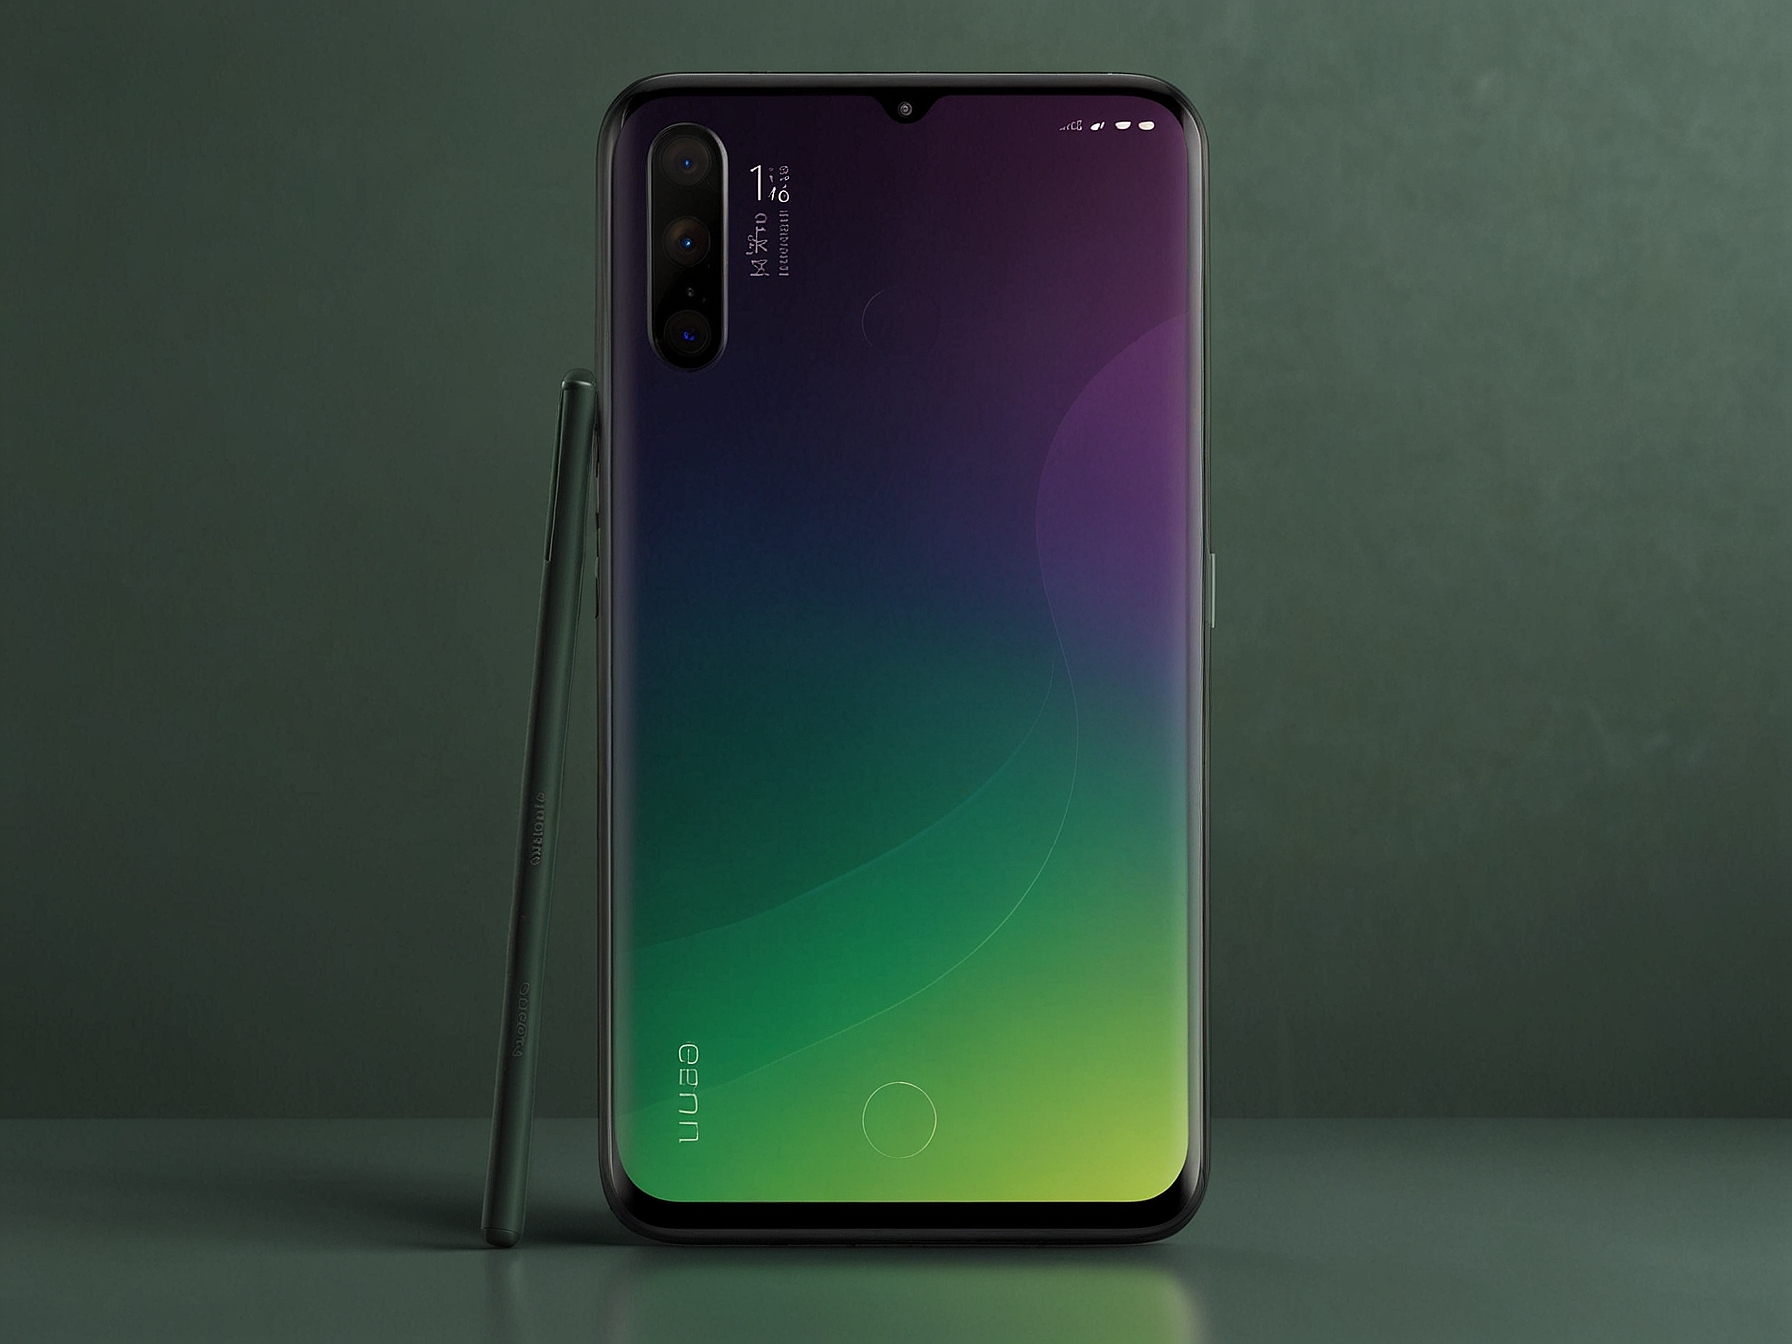 A sleek image of the vivo T3 Lite 5G in green and black finishes, showcasing its flat, contemporary design and build quality that aims to appeal to modern smartphone users.